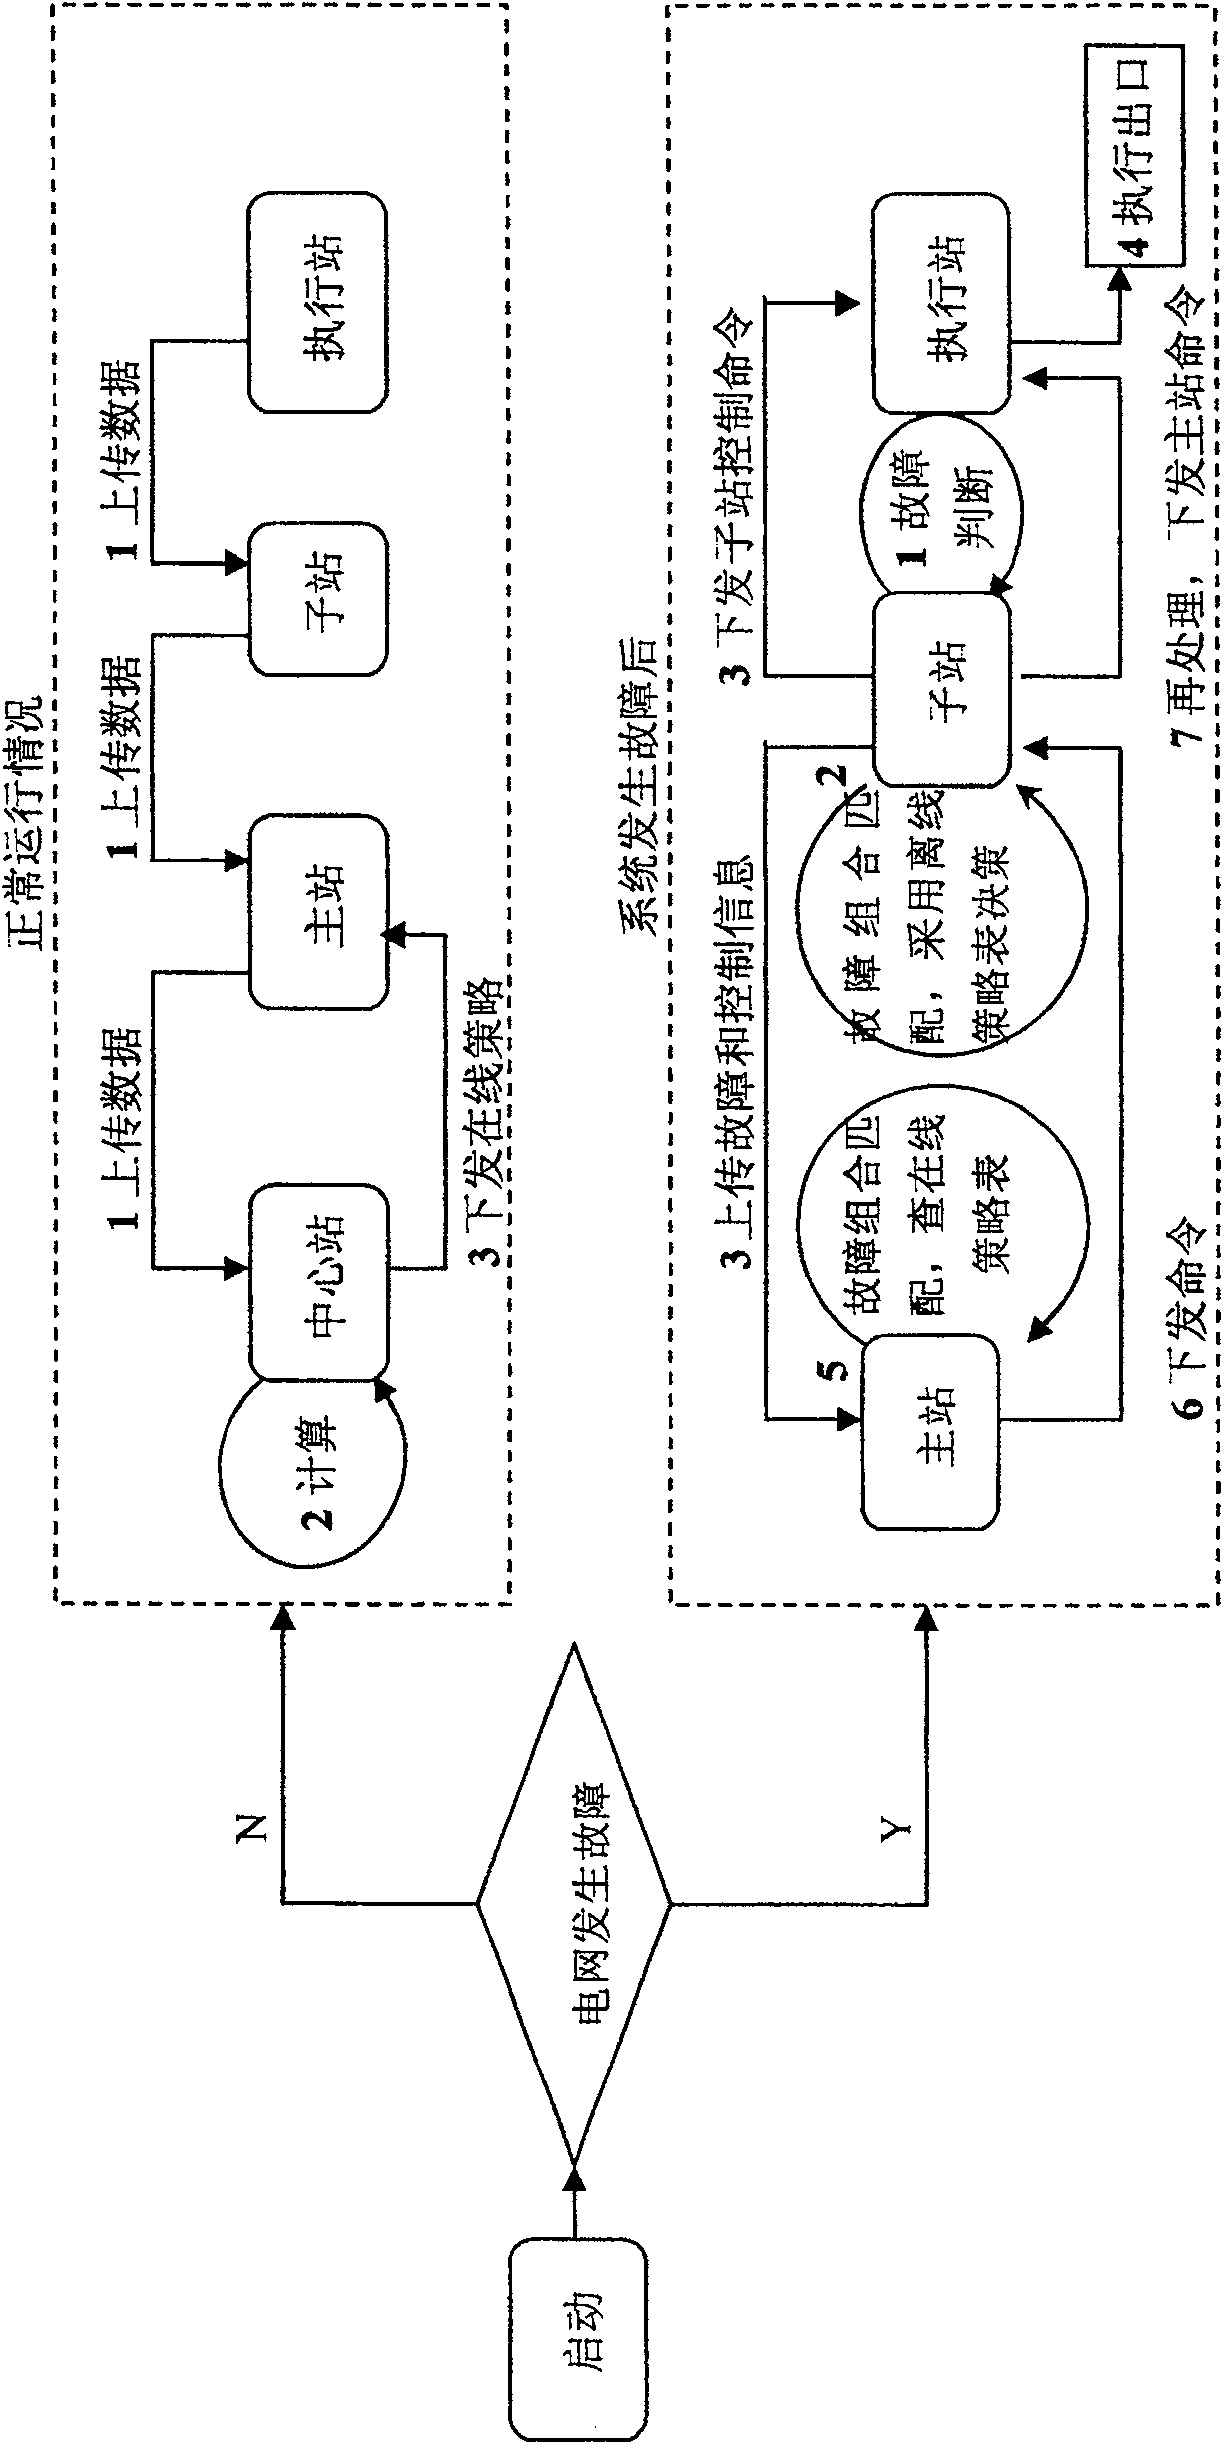 Closed-loop self-adaption emergency control method for large electric network 'centralized coordination, layered control'